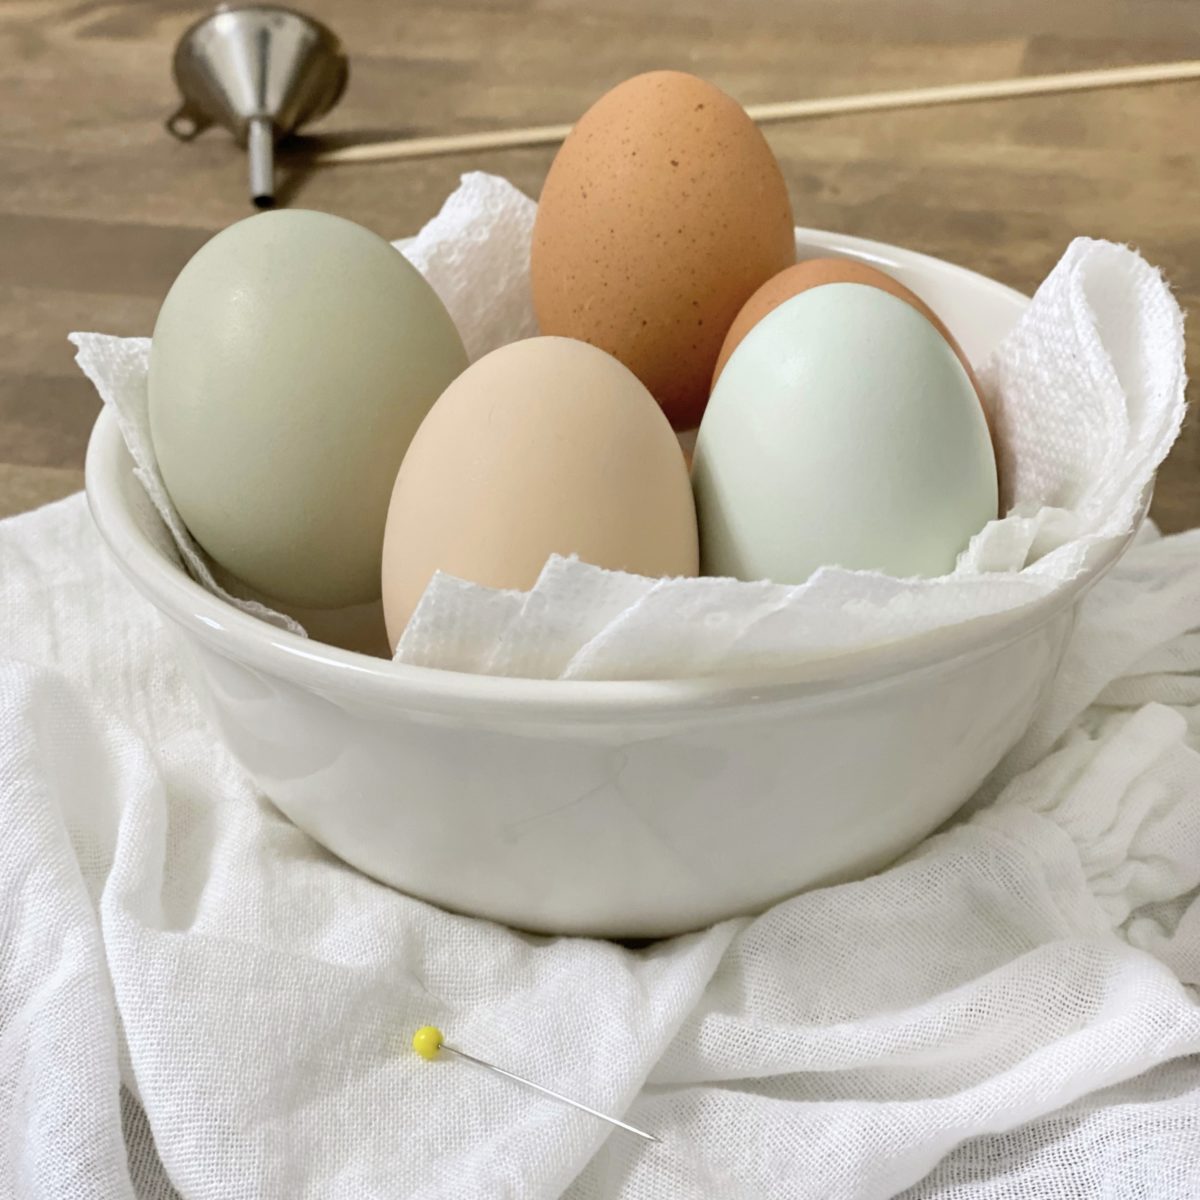 Different shades of brown, green and blue eggs in a white bowl drying after being cleaned and drained. 